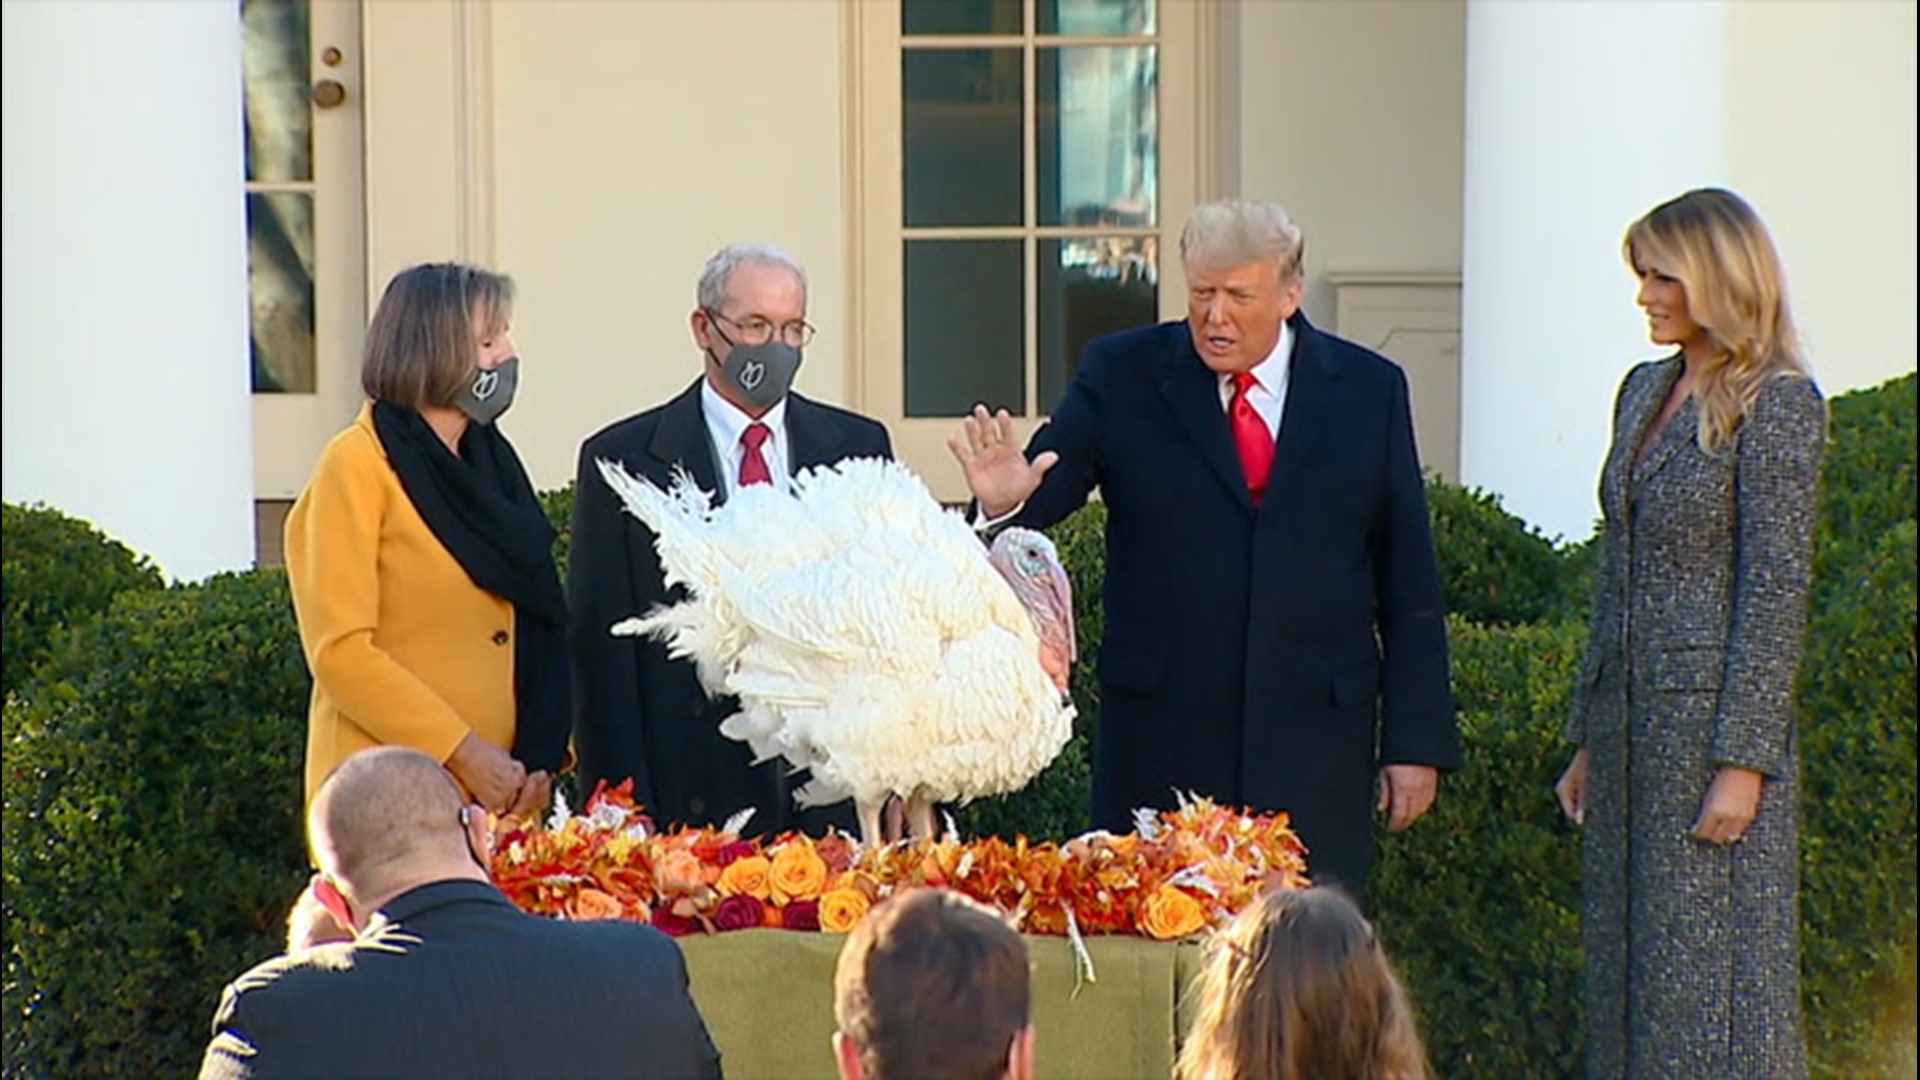 President Donald Trump and First Lady Melania Trump carried out the annual tradition of pardoning a turkey ahead of Thanksgiving on Tuesday, Nov. 24. According to the White House, Corn 'enjoys eating sweet corn, watching college football and storm chasing.'